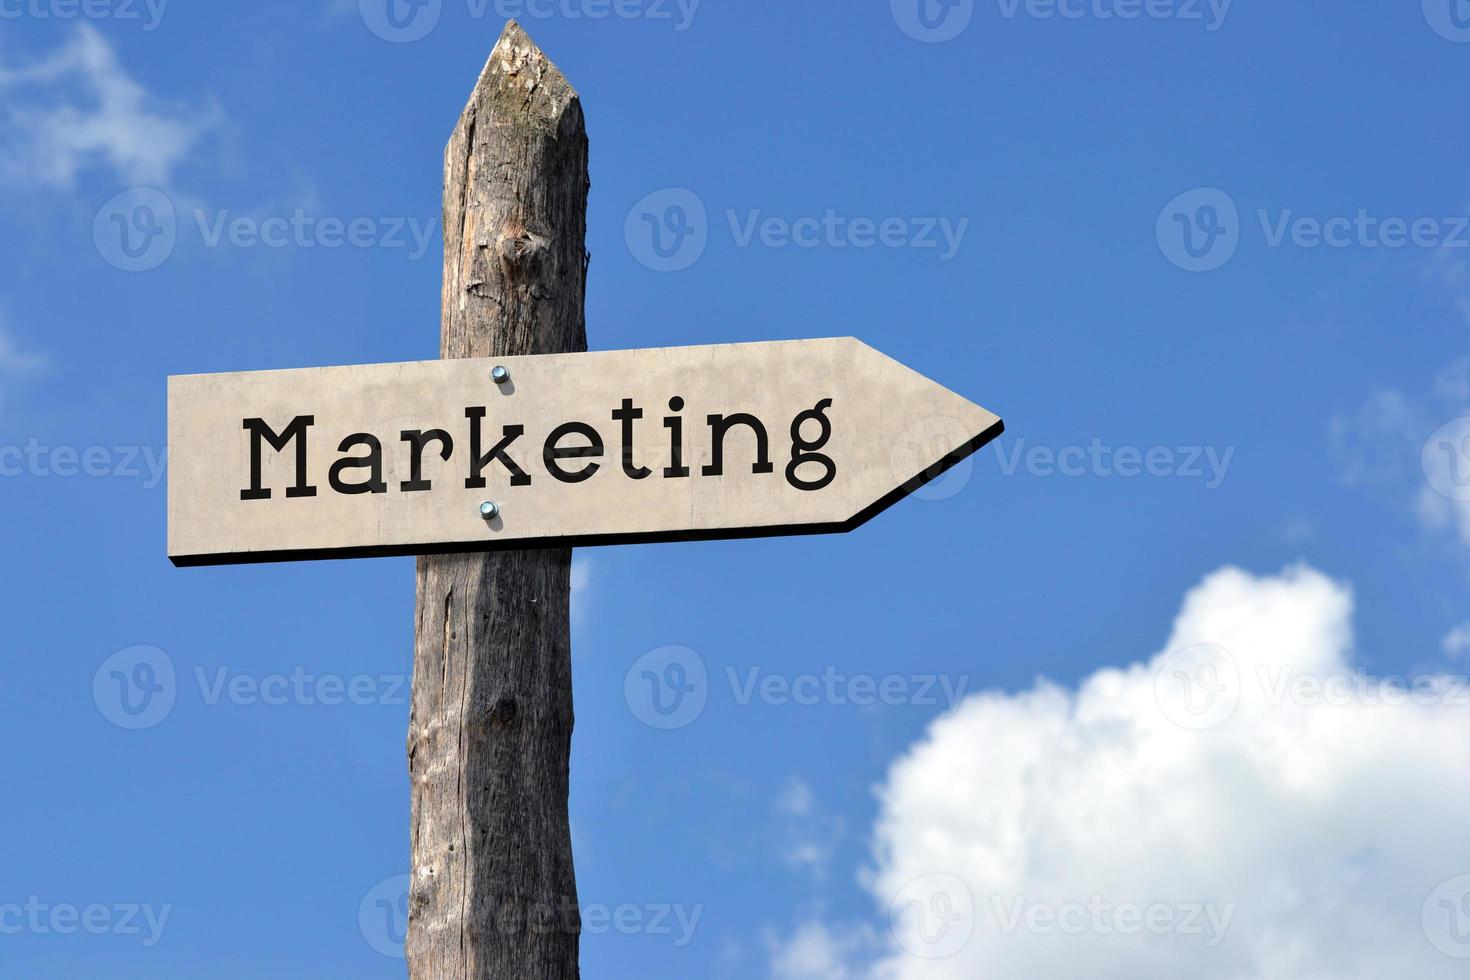 Marketing - Wooden Signpost with one Arrow, Sky with Clouds photo